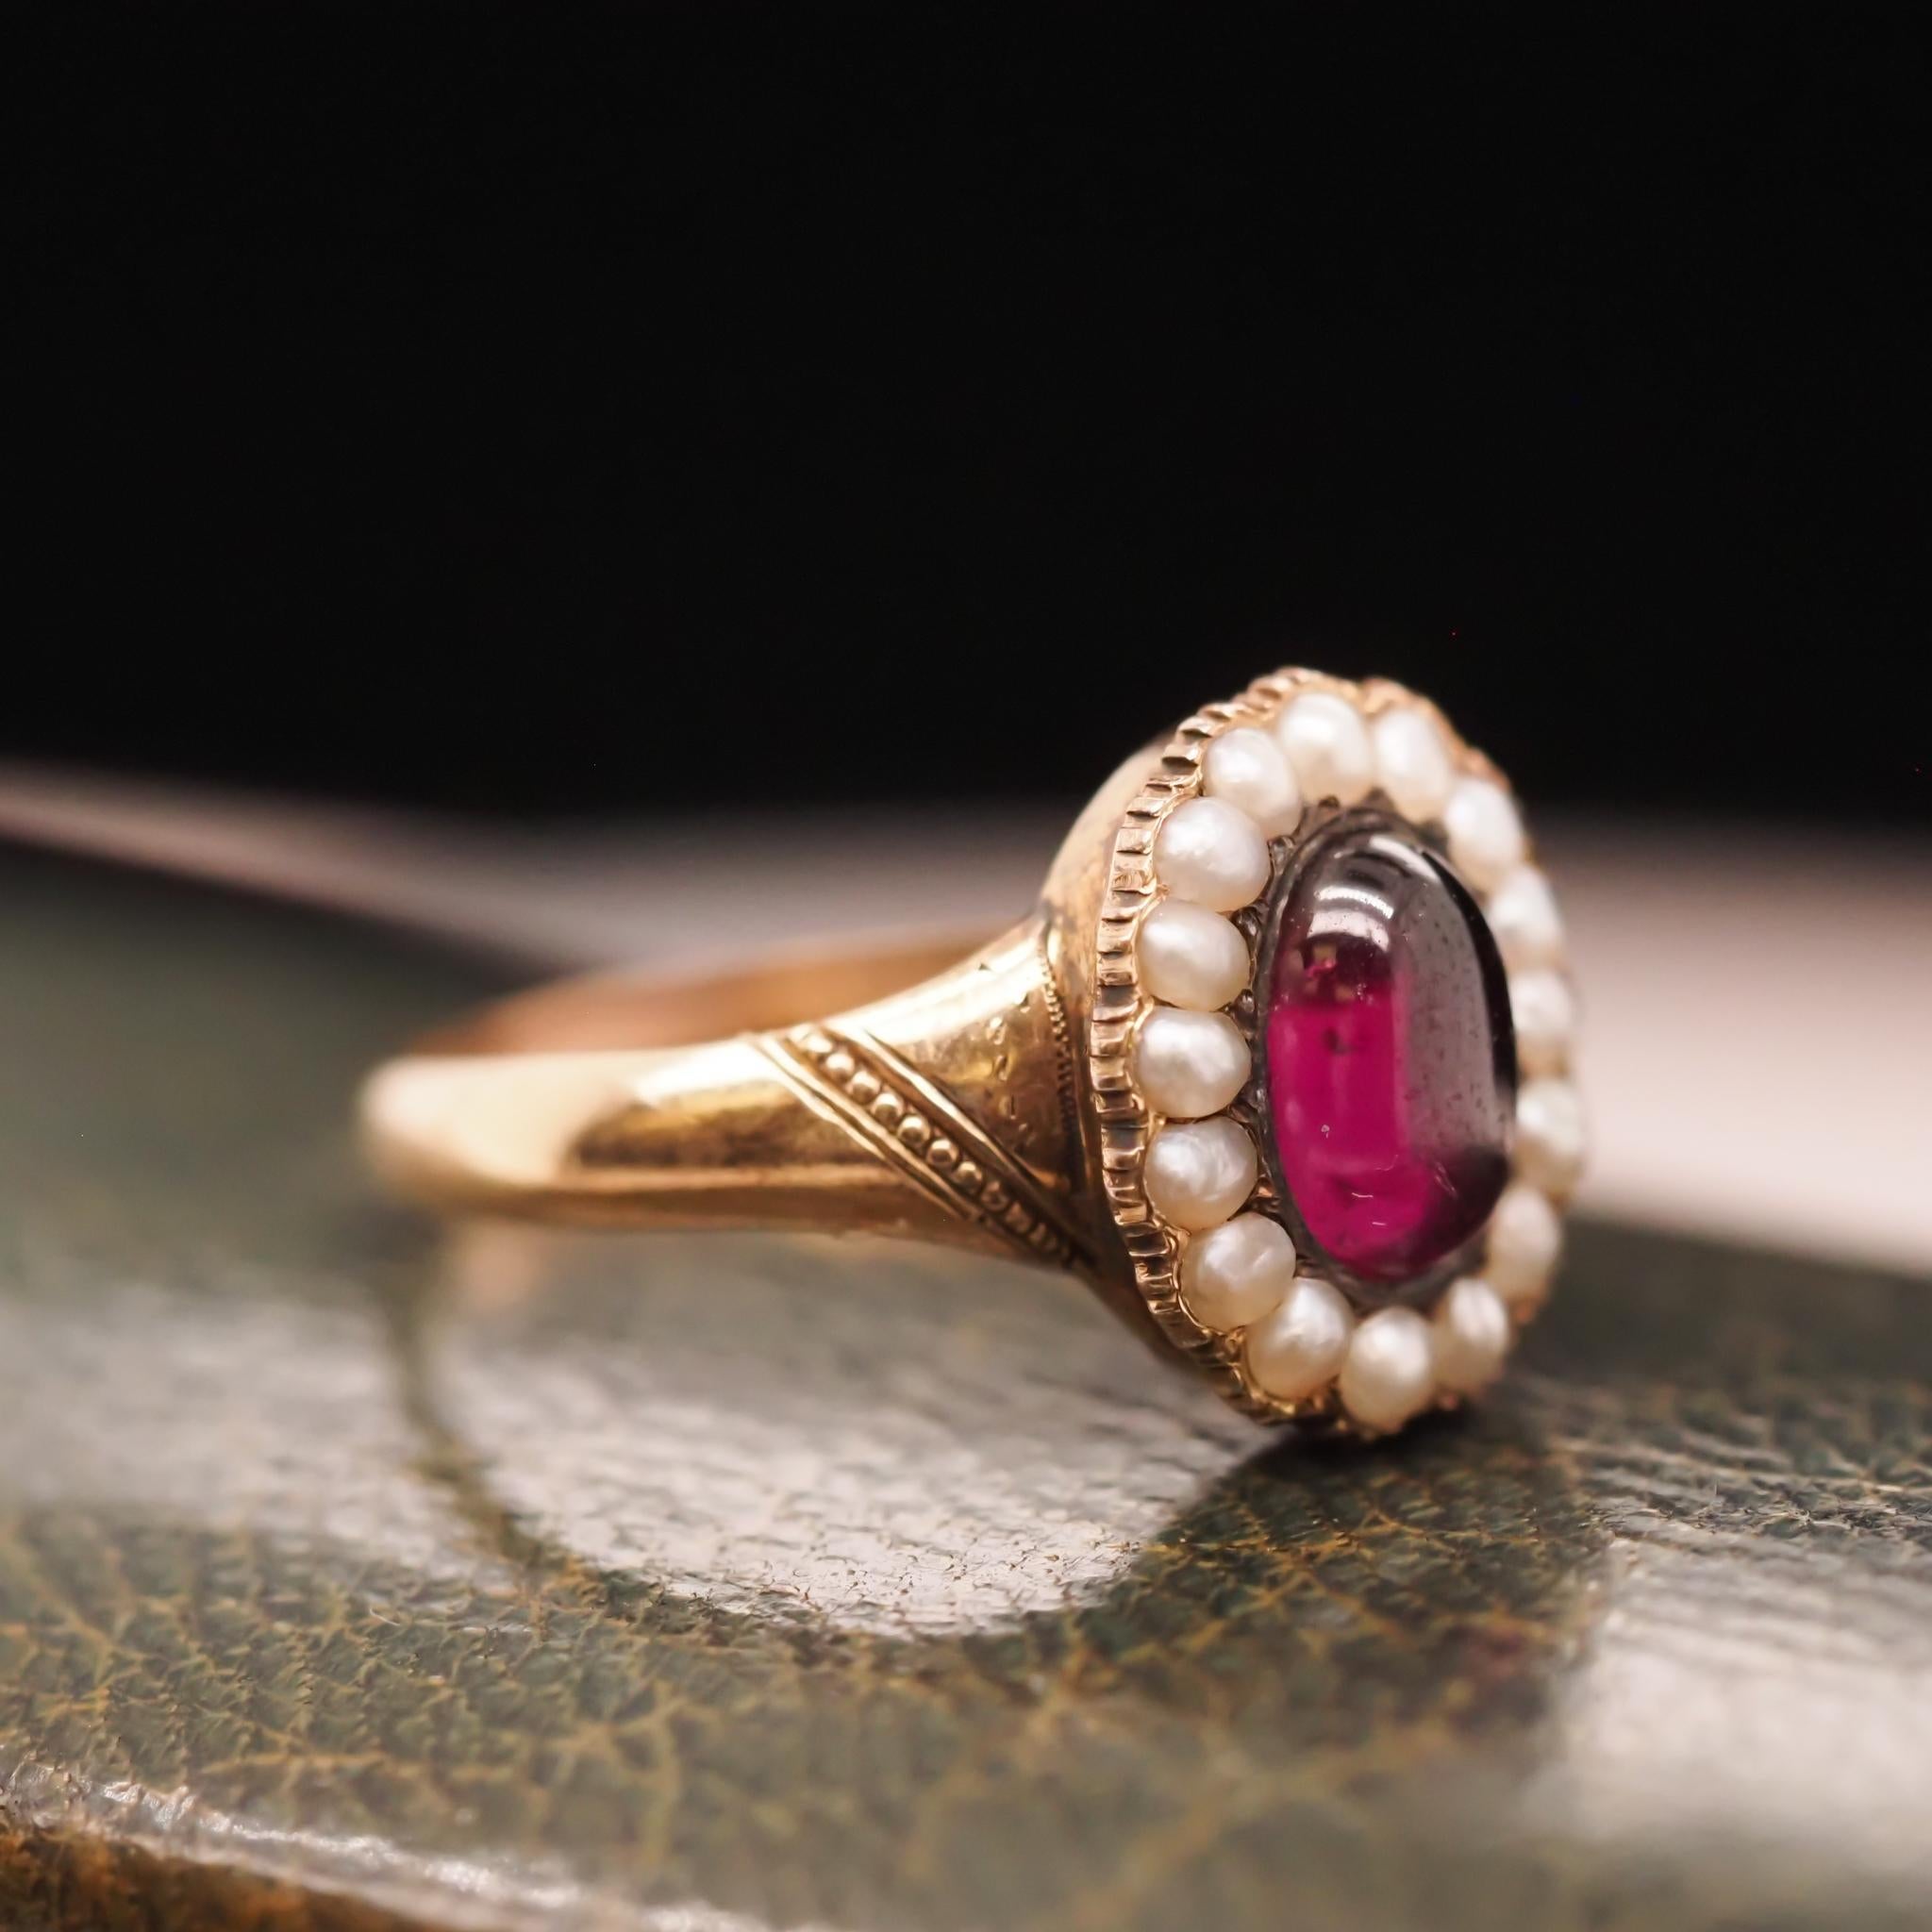 Year: 1863 (Engraved on inner shank)
Item Details:
Ring Size: 7
Metal Type: 9k Yellow-Rose Tone Gold [Hallmarked, and Tested]
Weight: 3.0 grams
Center Details: Tourmaline, Deep Purple, 7.7mm x 5.25mm, Natural
Side Stone Details: Seed Pearls, 2mm